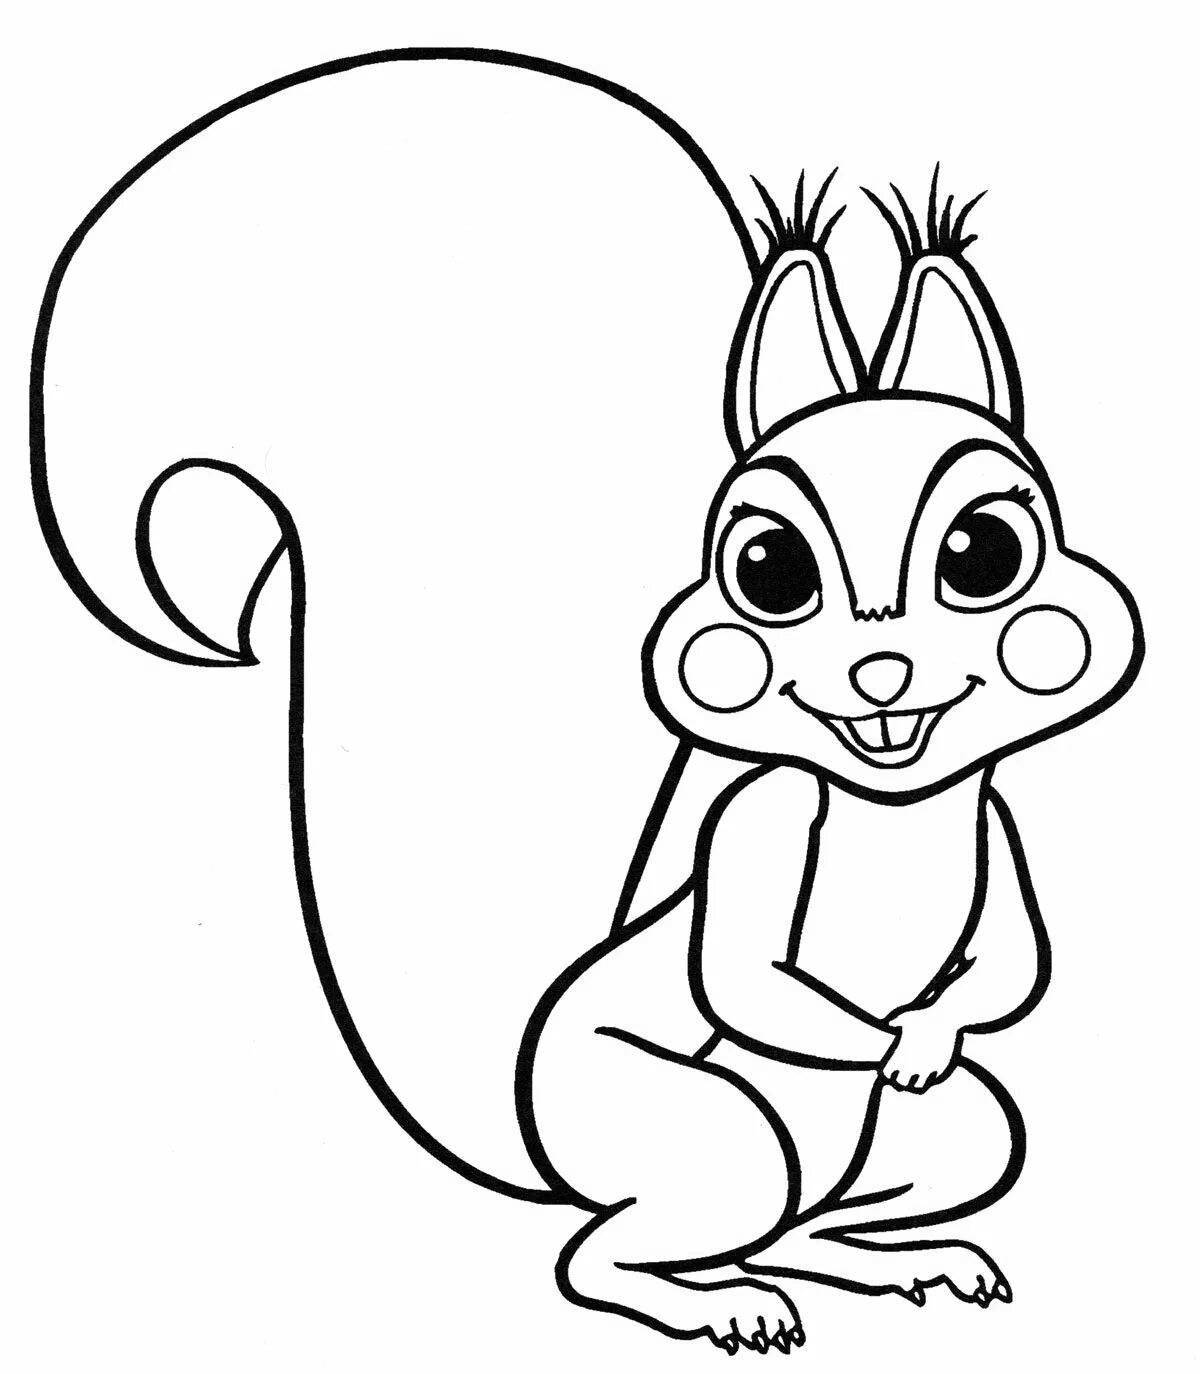 Radiant coloring page squirrel drawing